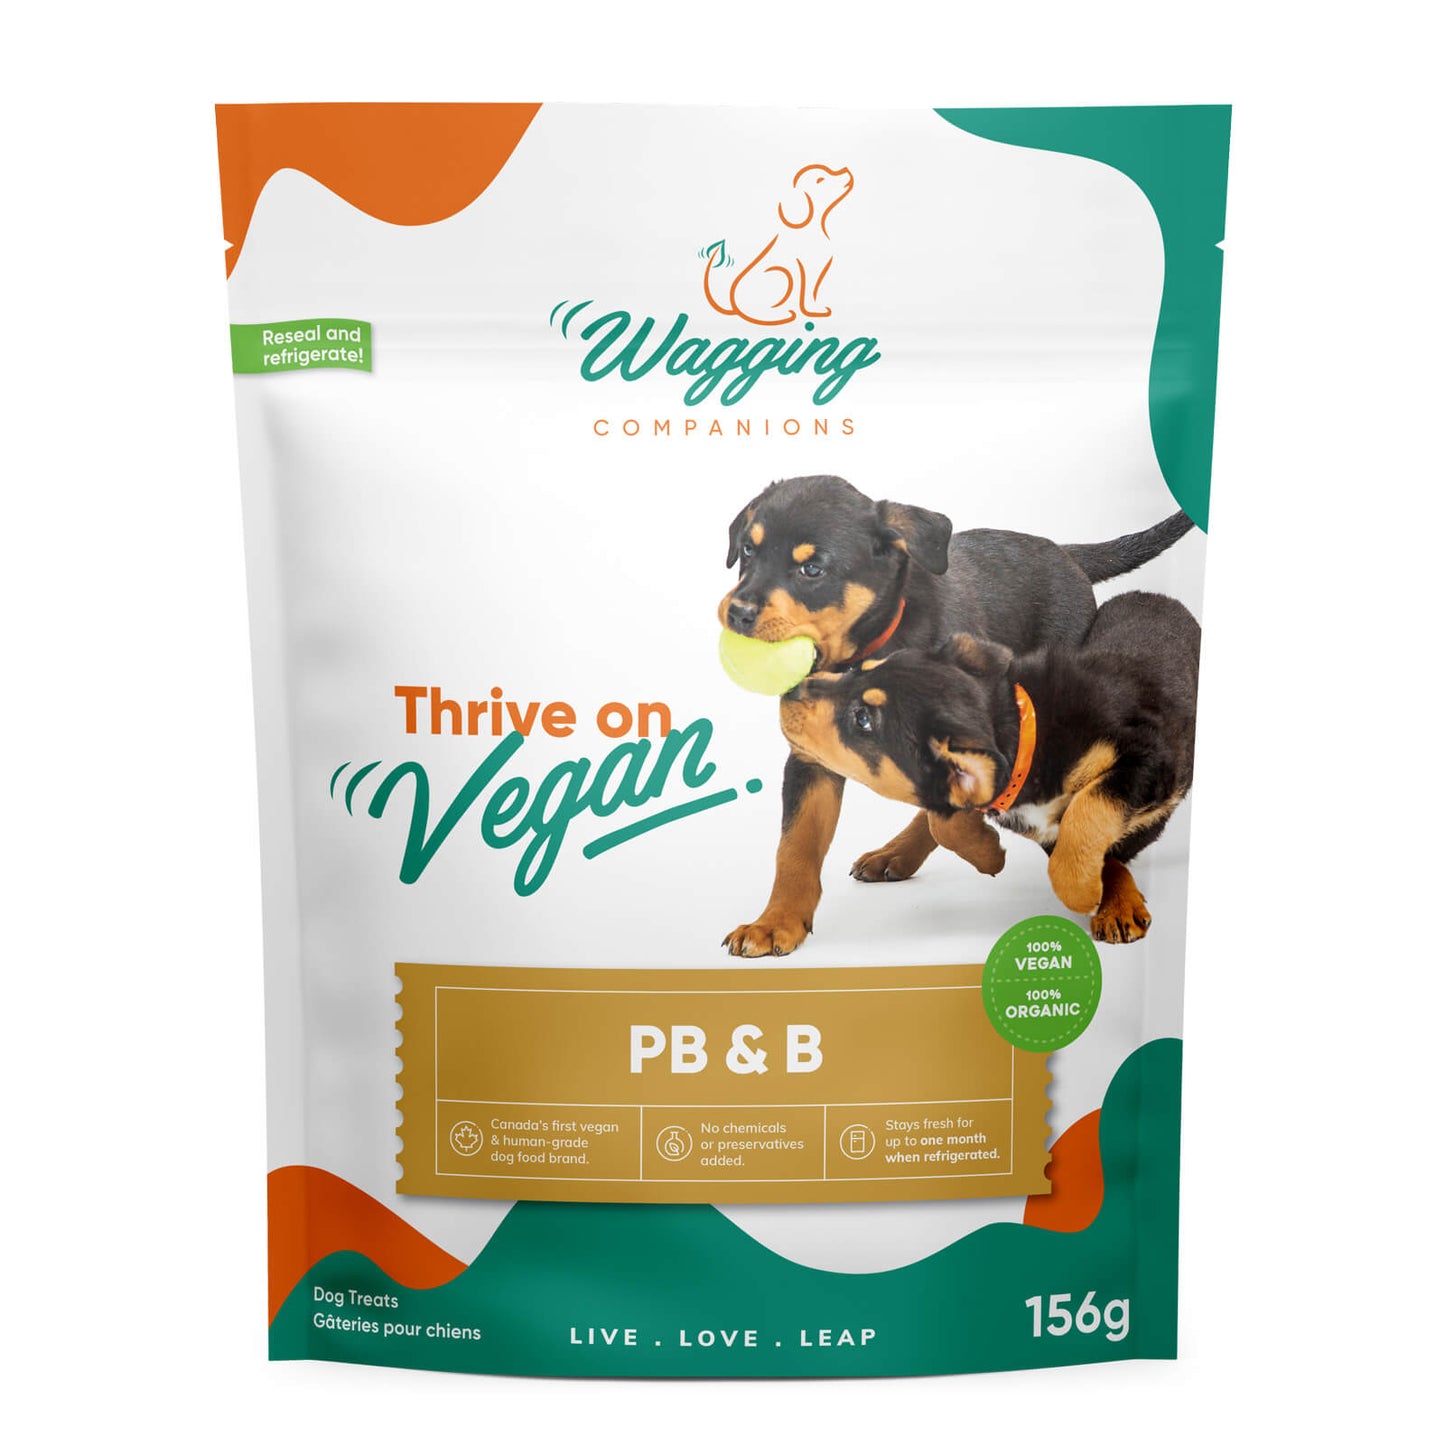 Front view of Wagging Companions' dog treat package featuring the 'PB & B' (peanut butter and banana) blend, proudly displaying its plant-based, 100% vegan label. The package boldly claims the brand's status as 'Canada's first vegan and human-grade dog food brand,' showcasing a flavorful and innovative blend that adheres to the brand's commitment to quality, vegan ingredients for dogs.